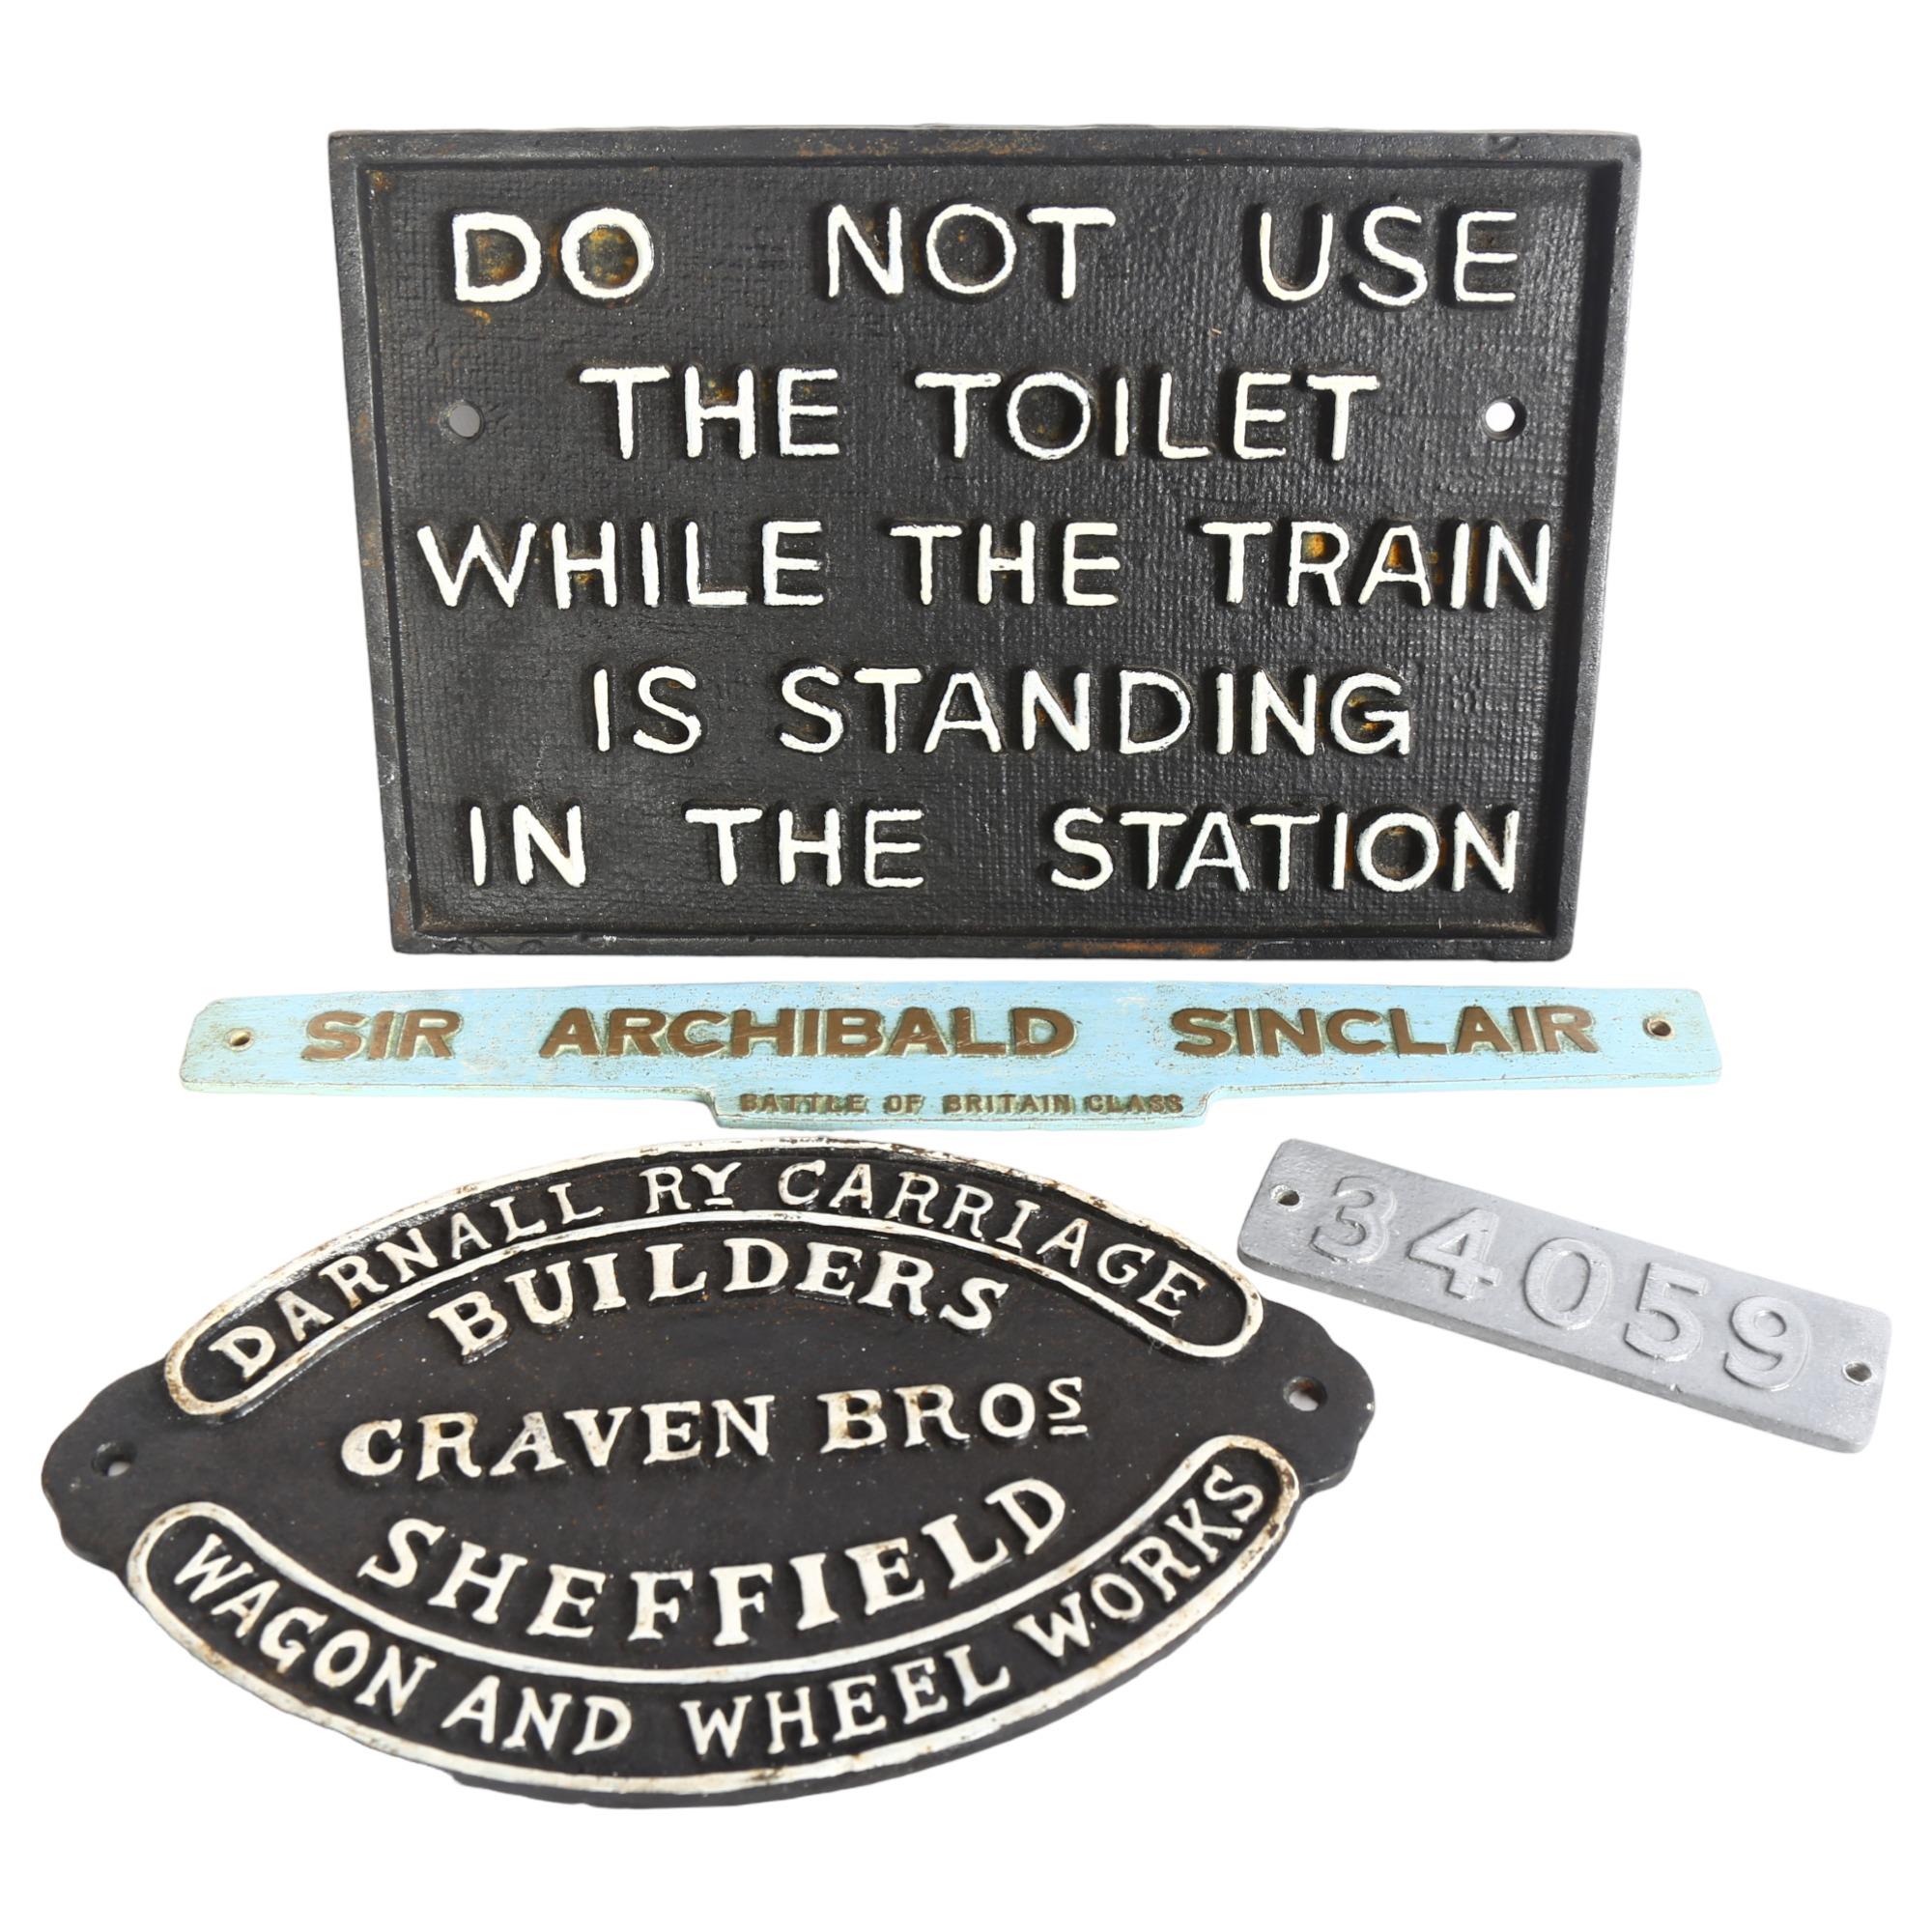 A group of modern railway-related signs, including a cast-iron sign with narrative "Do not use the